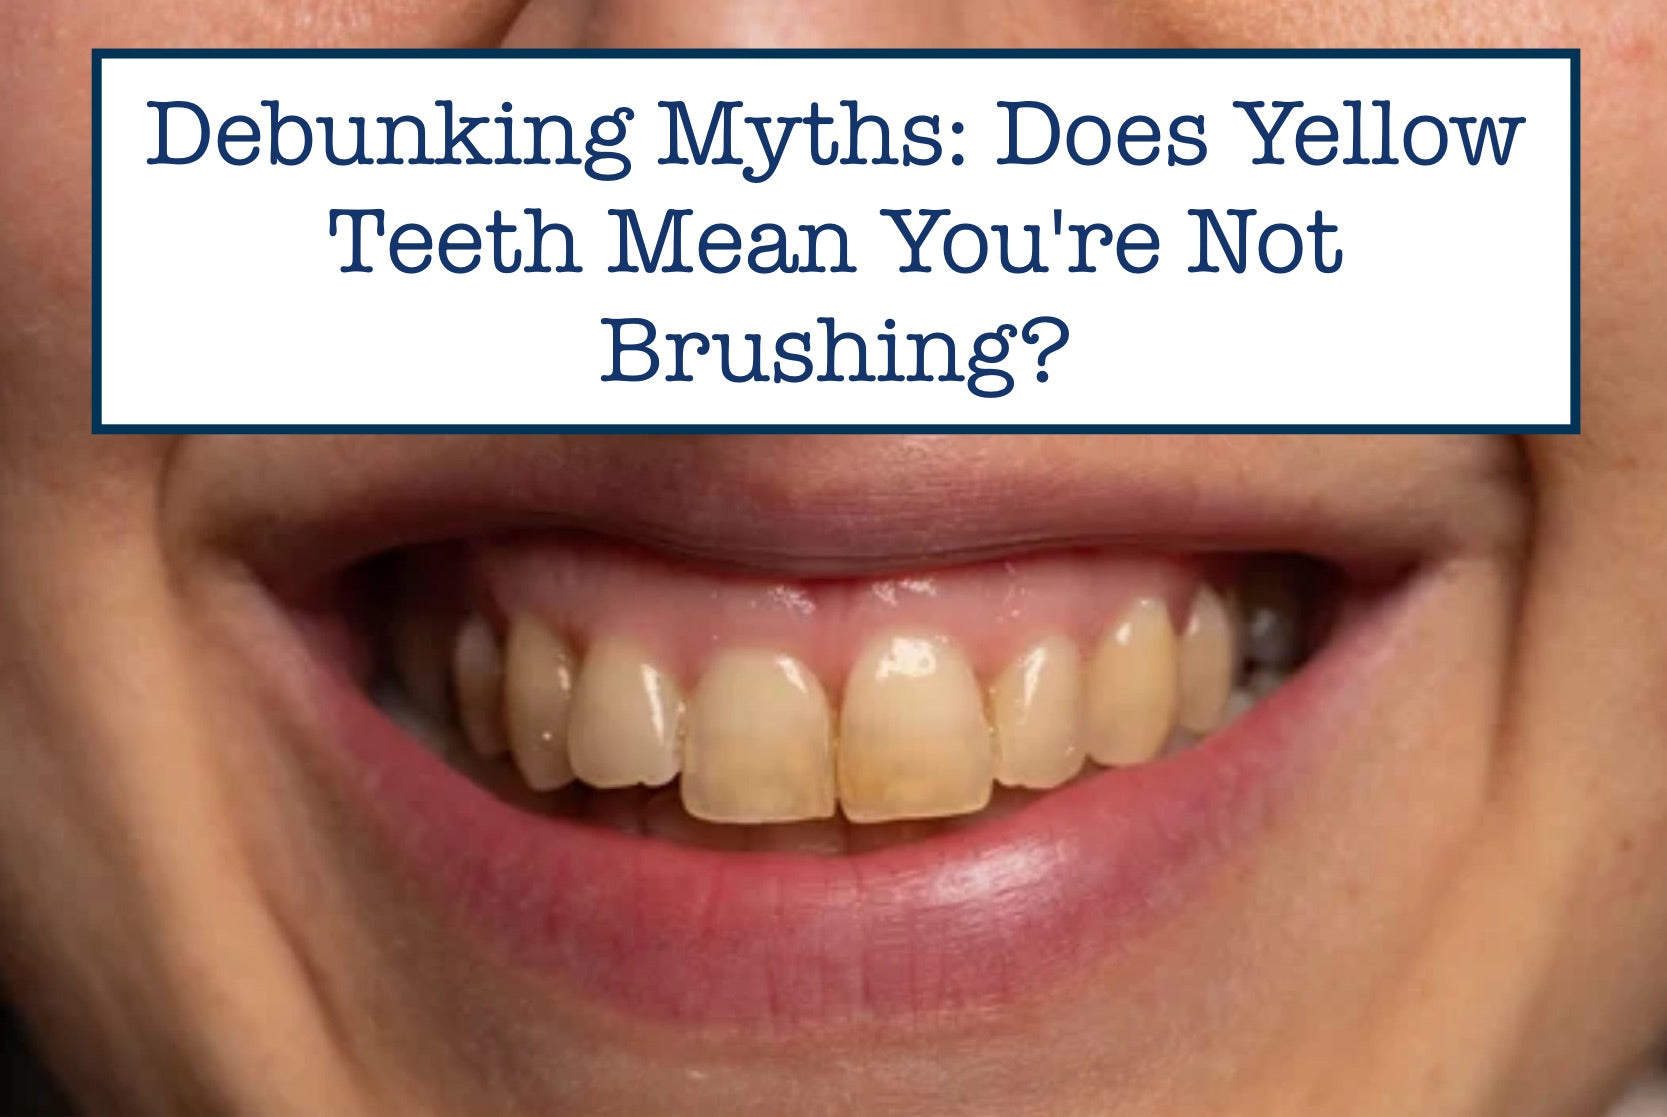 Debunking Myths: Does Yellow Teeth Mean You're Not Brushing?